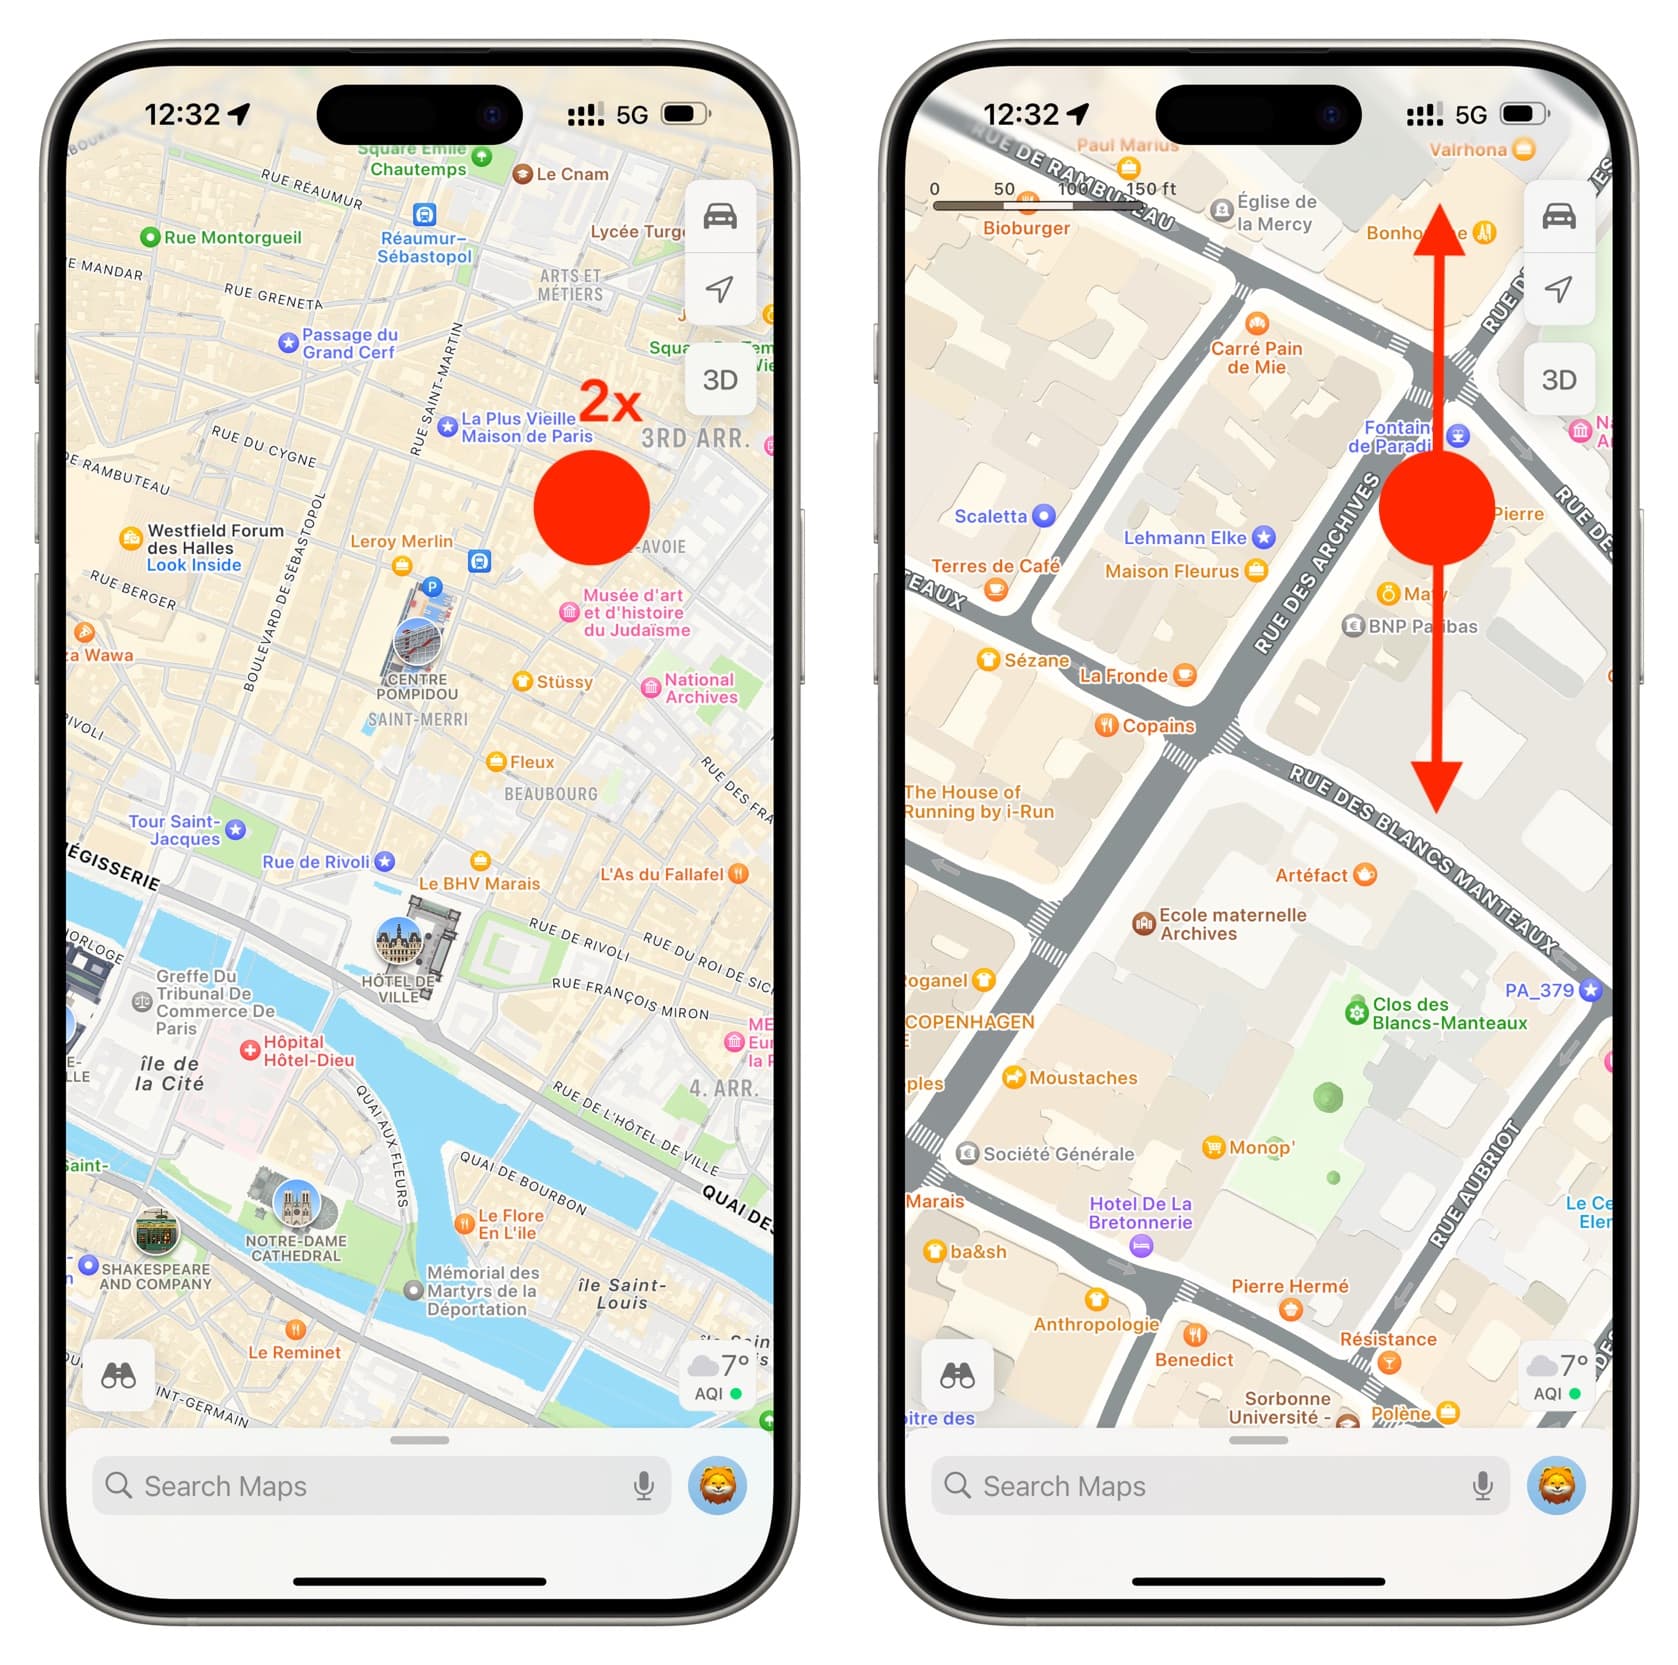 Zoom in and out in Apple Maps on iPhone with one finger